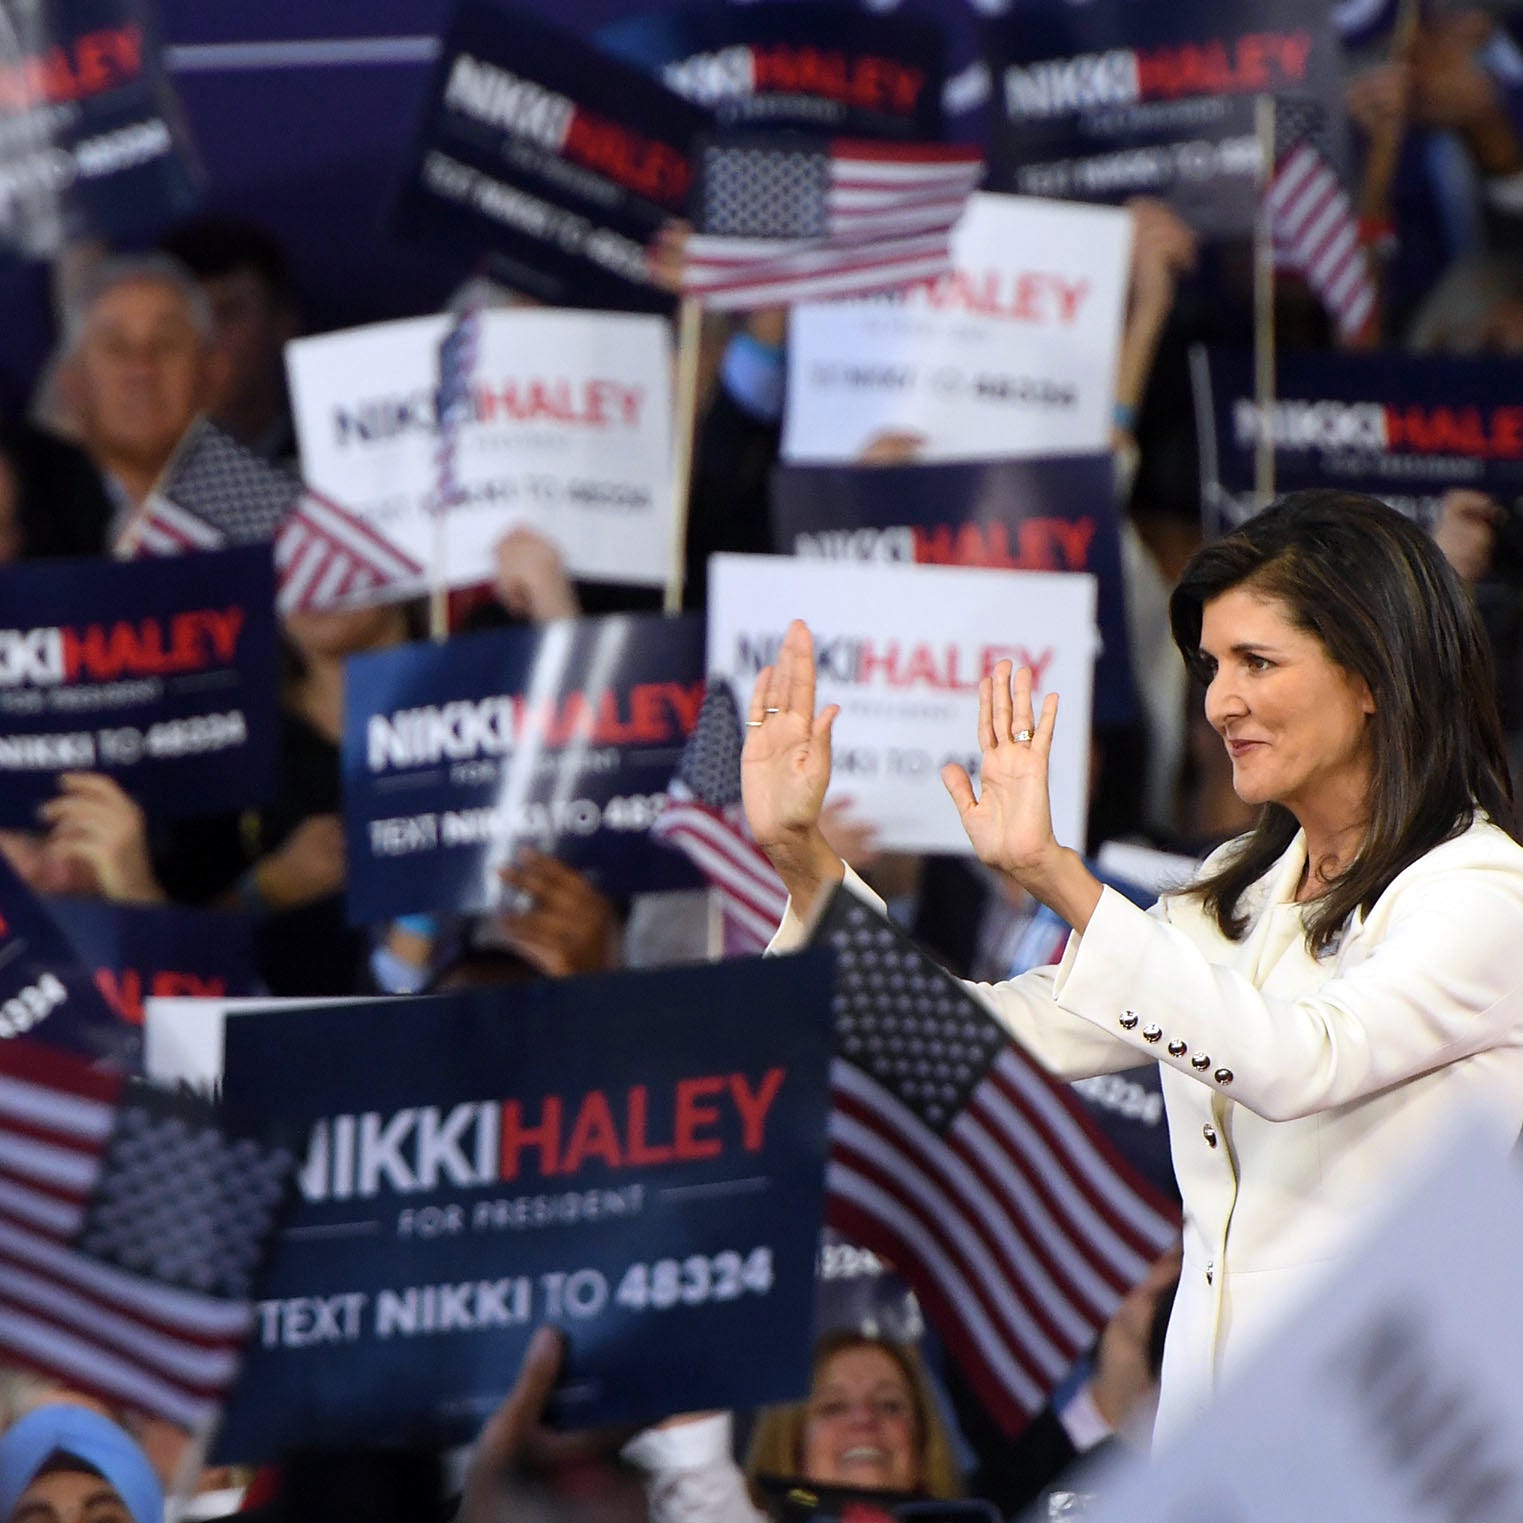 Former South Carolina Gov. Nikki Haley, who announced a 2024 run for U.S. President yesterday via Twitter, holds a rally with supporters at the Visitors Center in Charleston, S.C. Wednesday, Feb. 15, 2023.